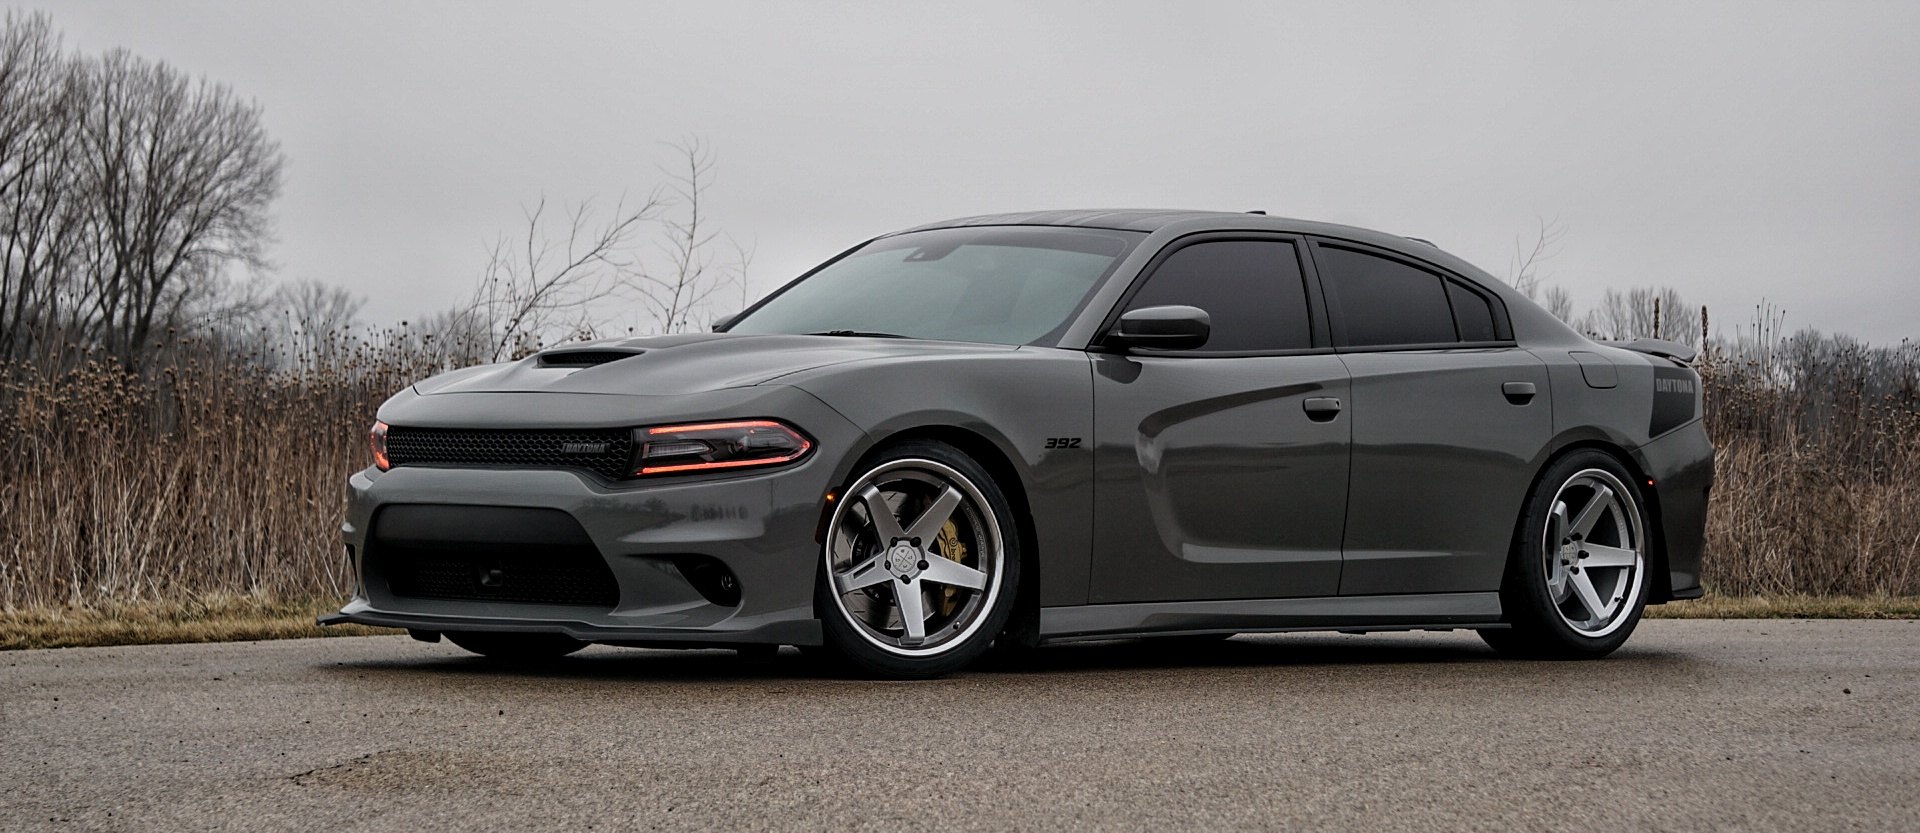 Aftermarket Vented Hood on Gray Dodge Charger 392 - Photo by Blaque Diamond Wheels